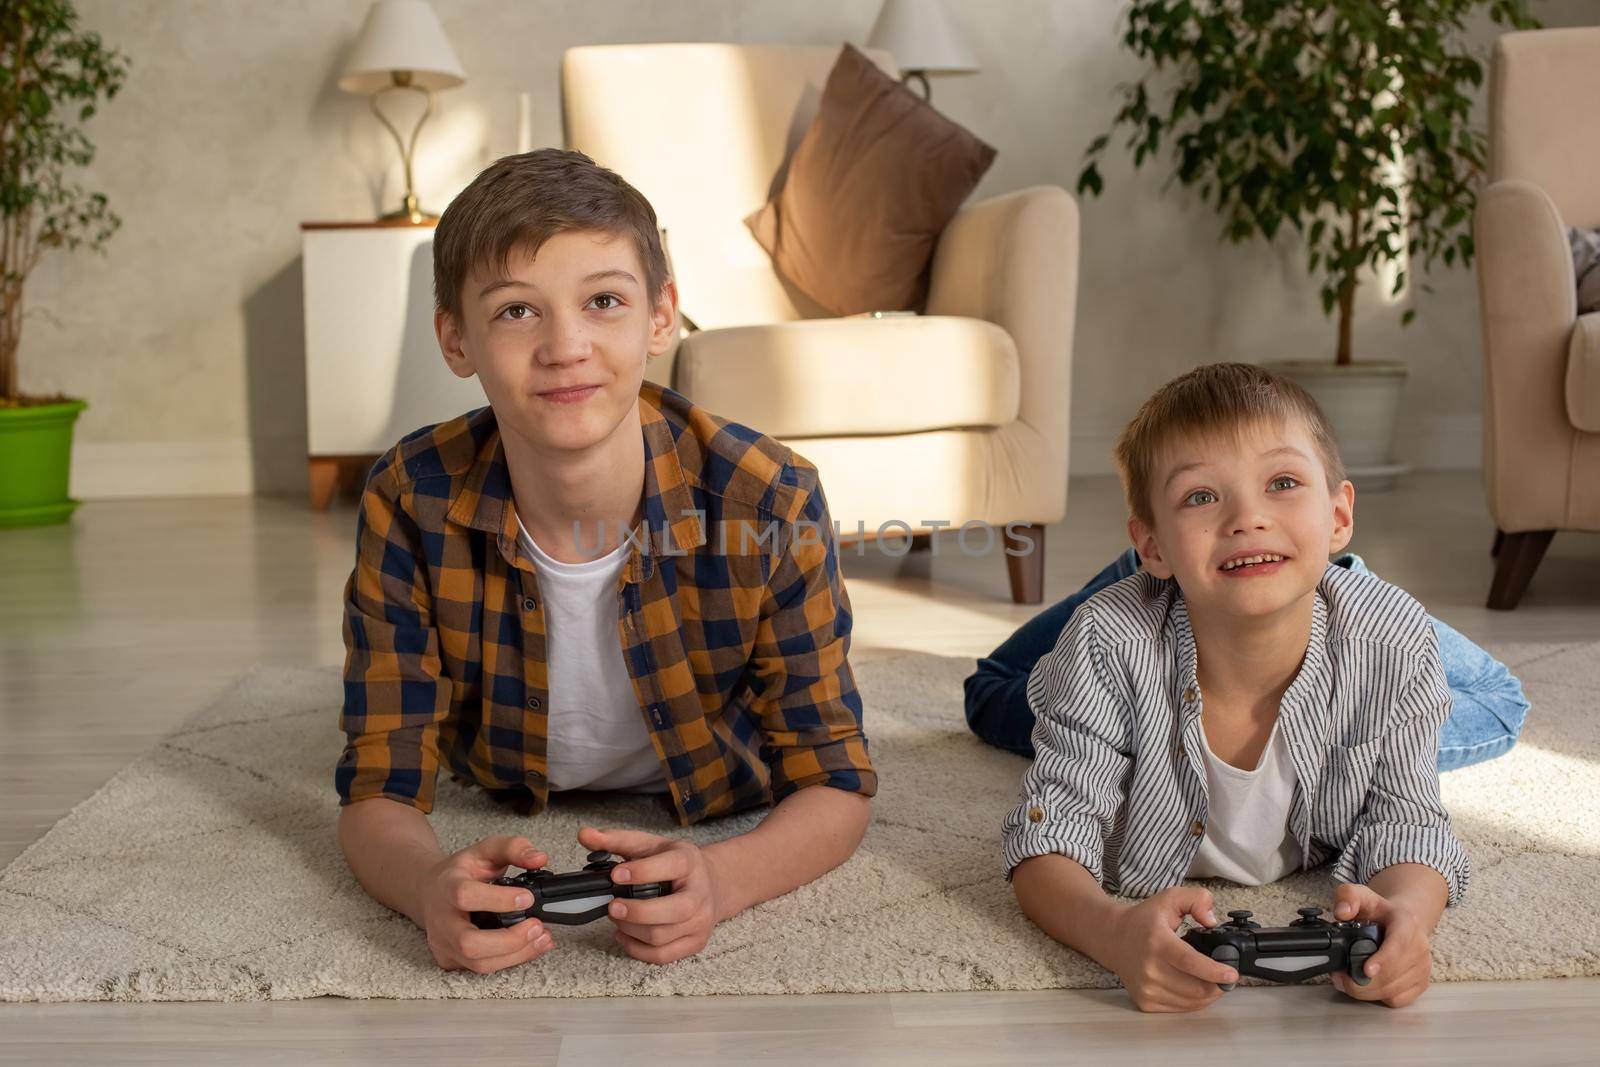 Two joyful boys lie on the floor in a room playing video games with joysticks. Close up